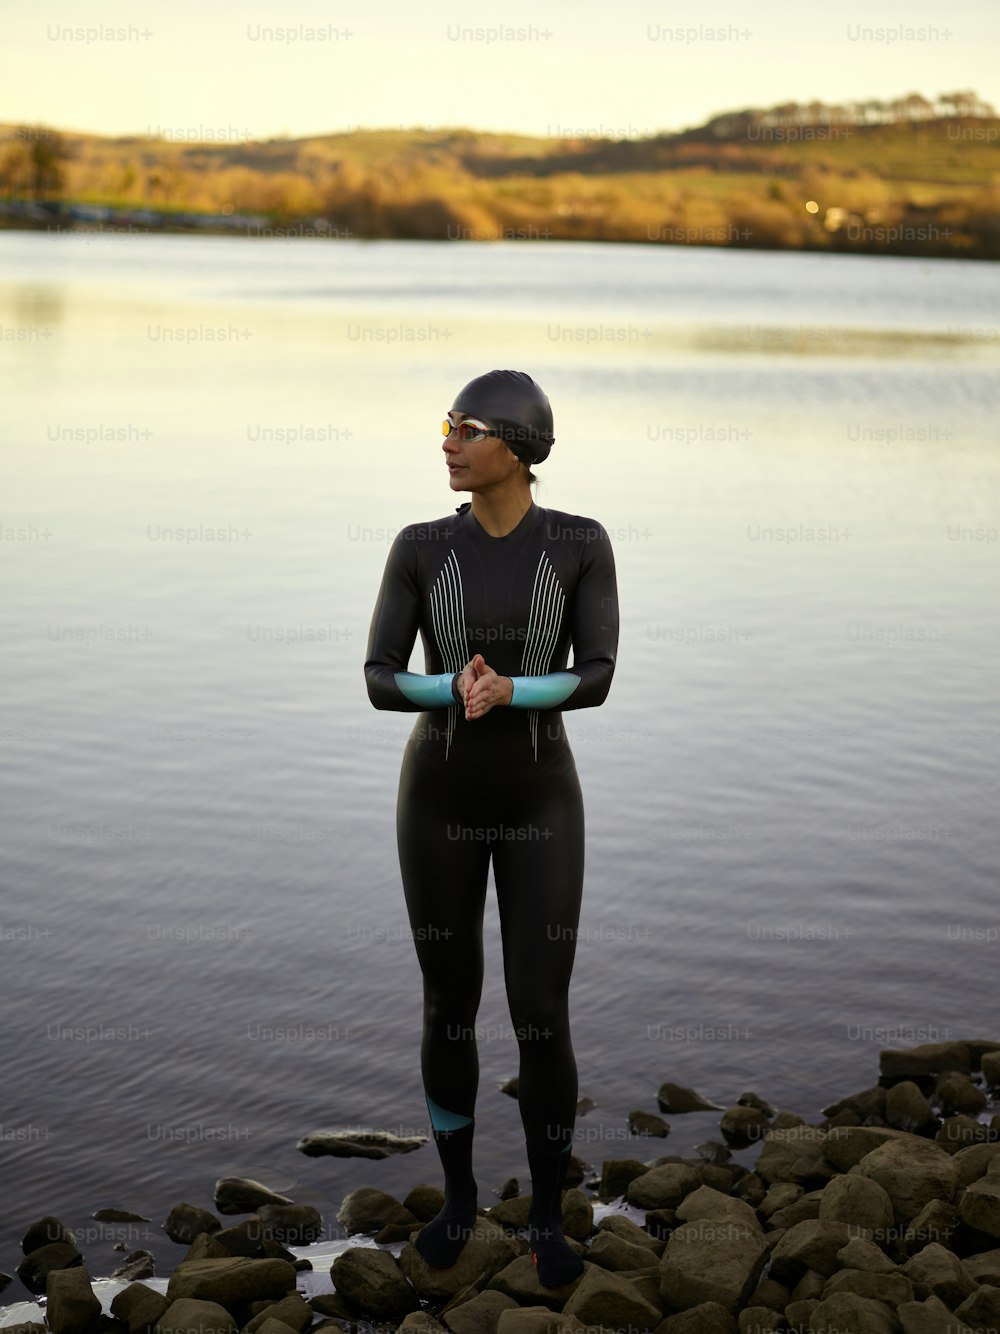 a woman in a wet suit standing on rocks near a body of water